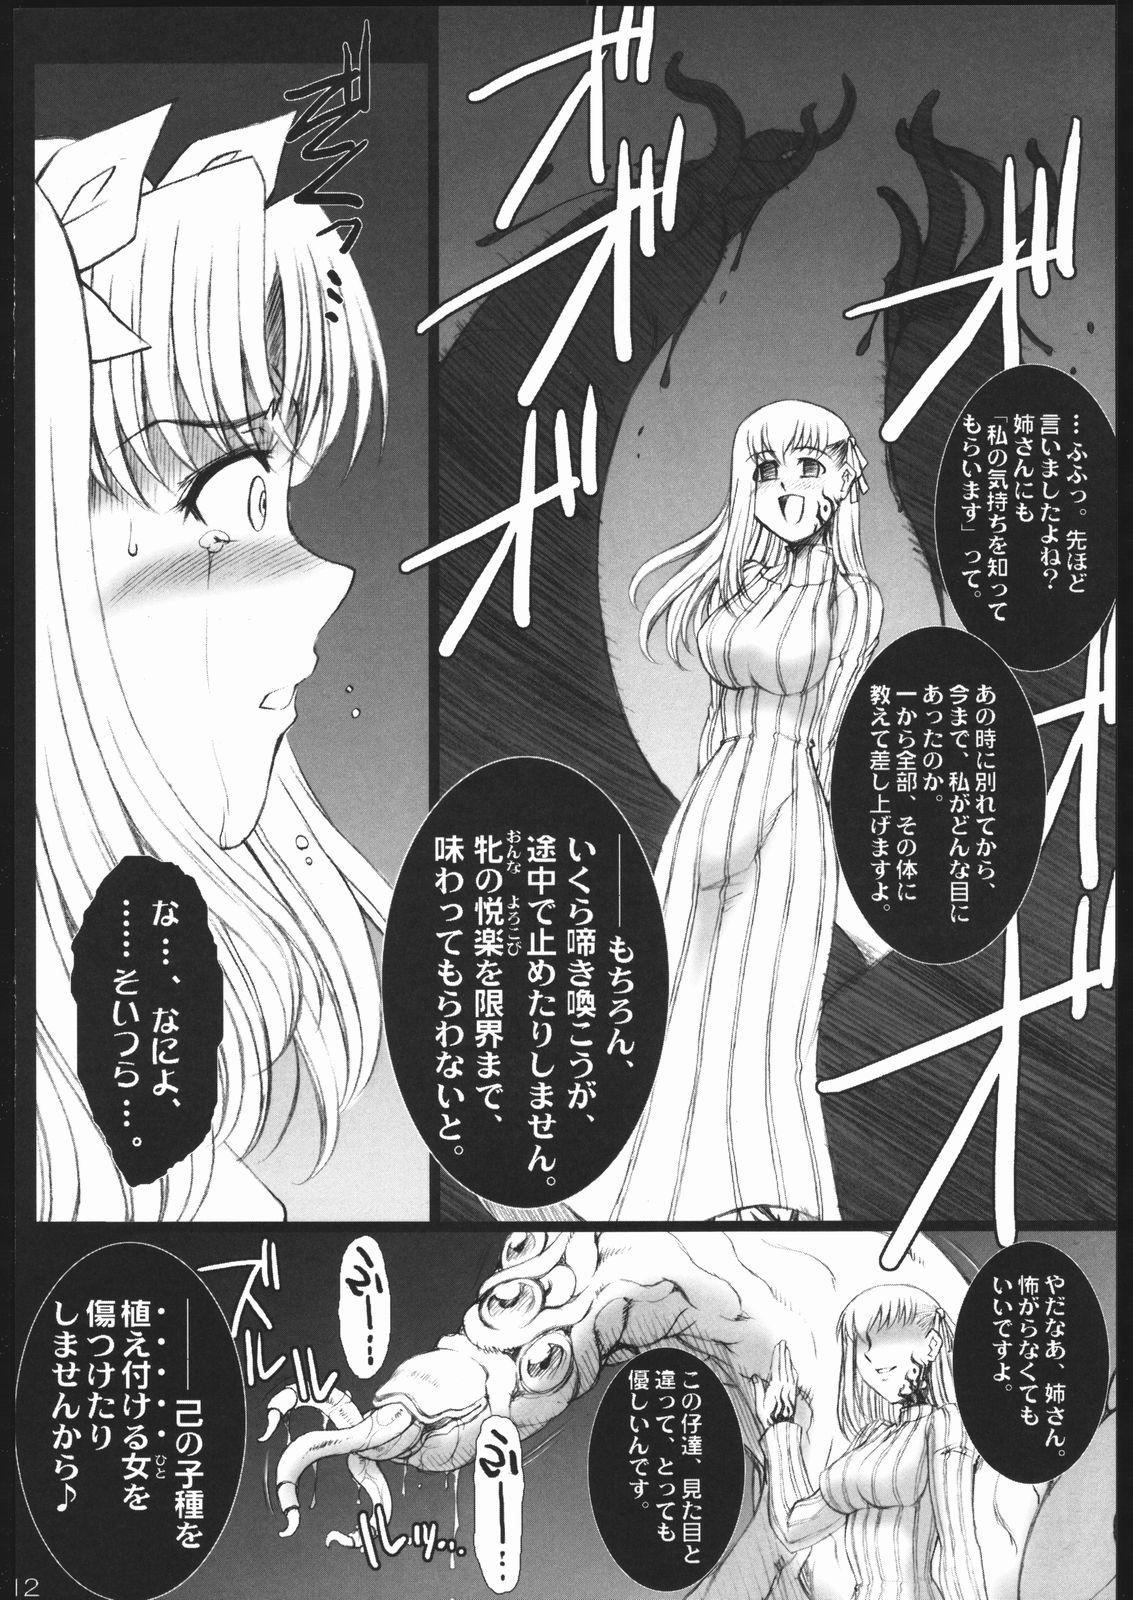 Leather Red Degeneration - Fate stay night Gonzo - Page 11